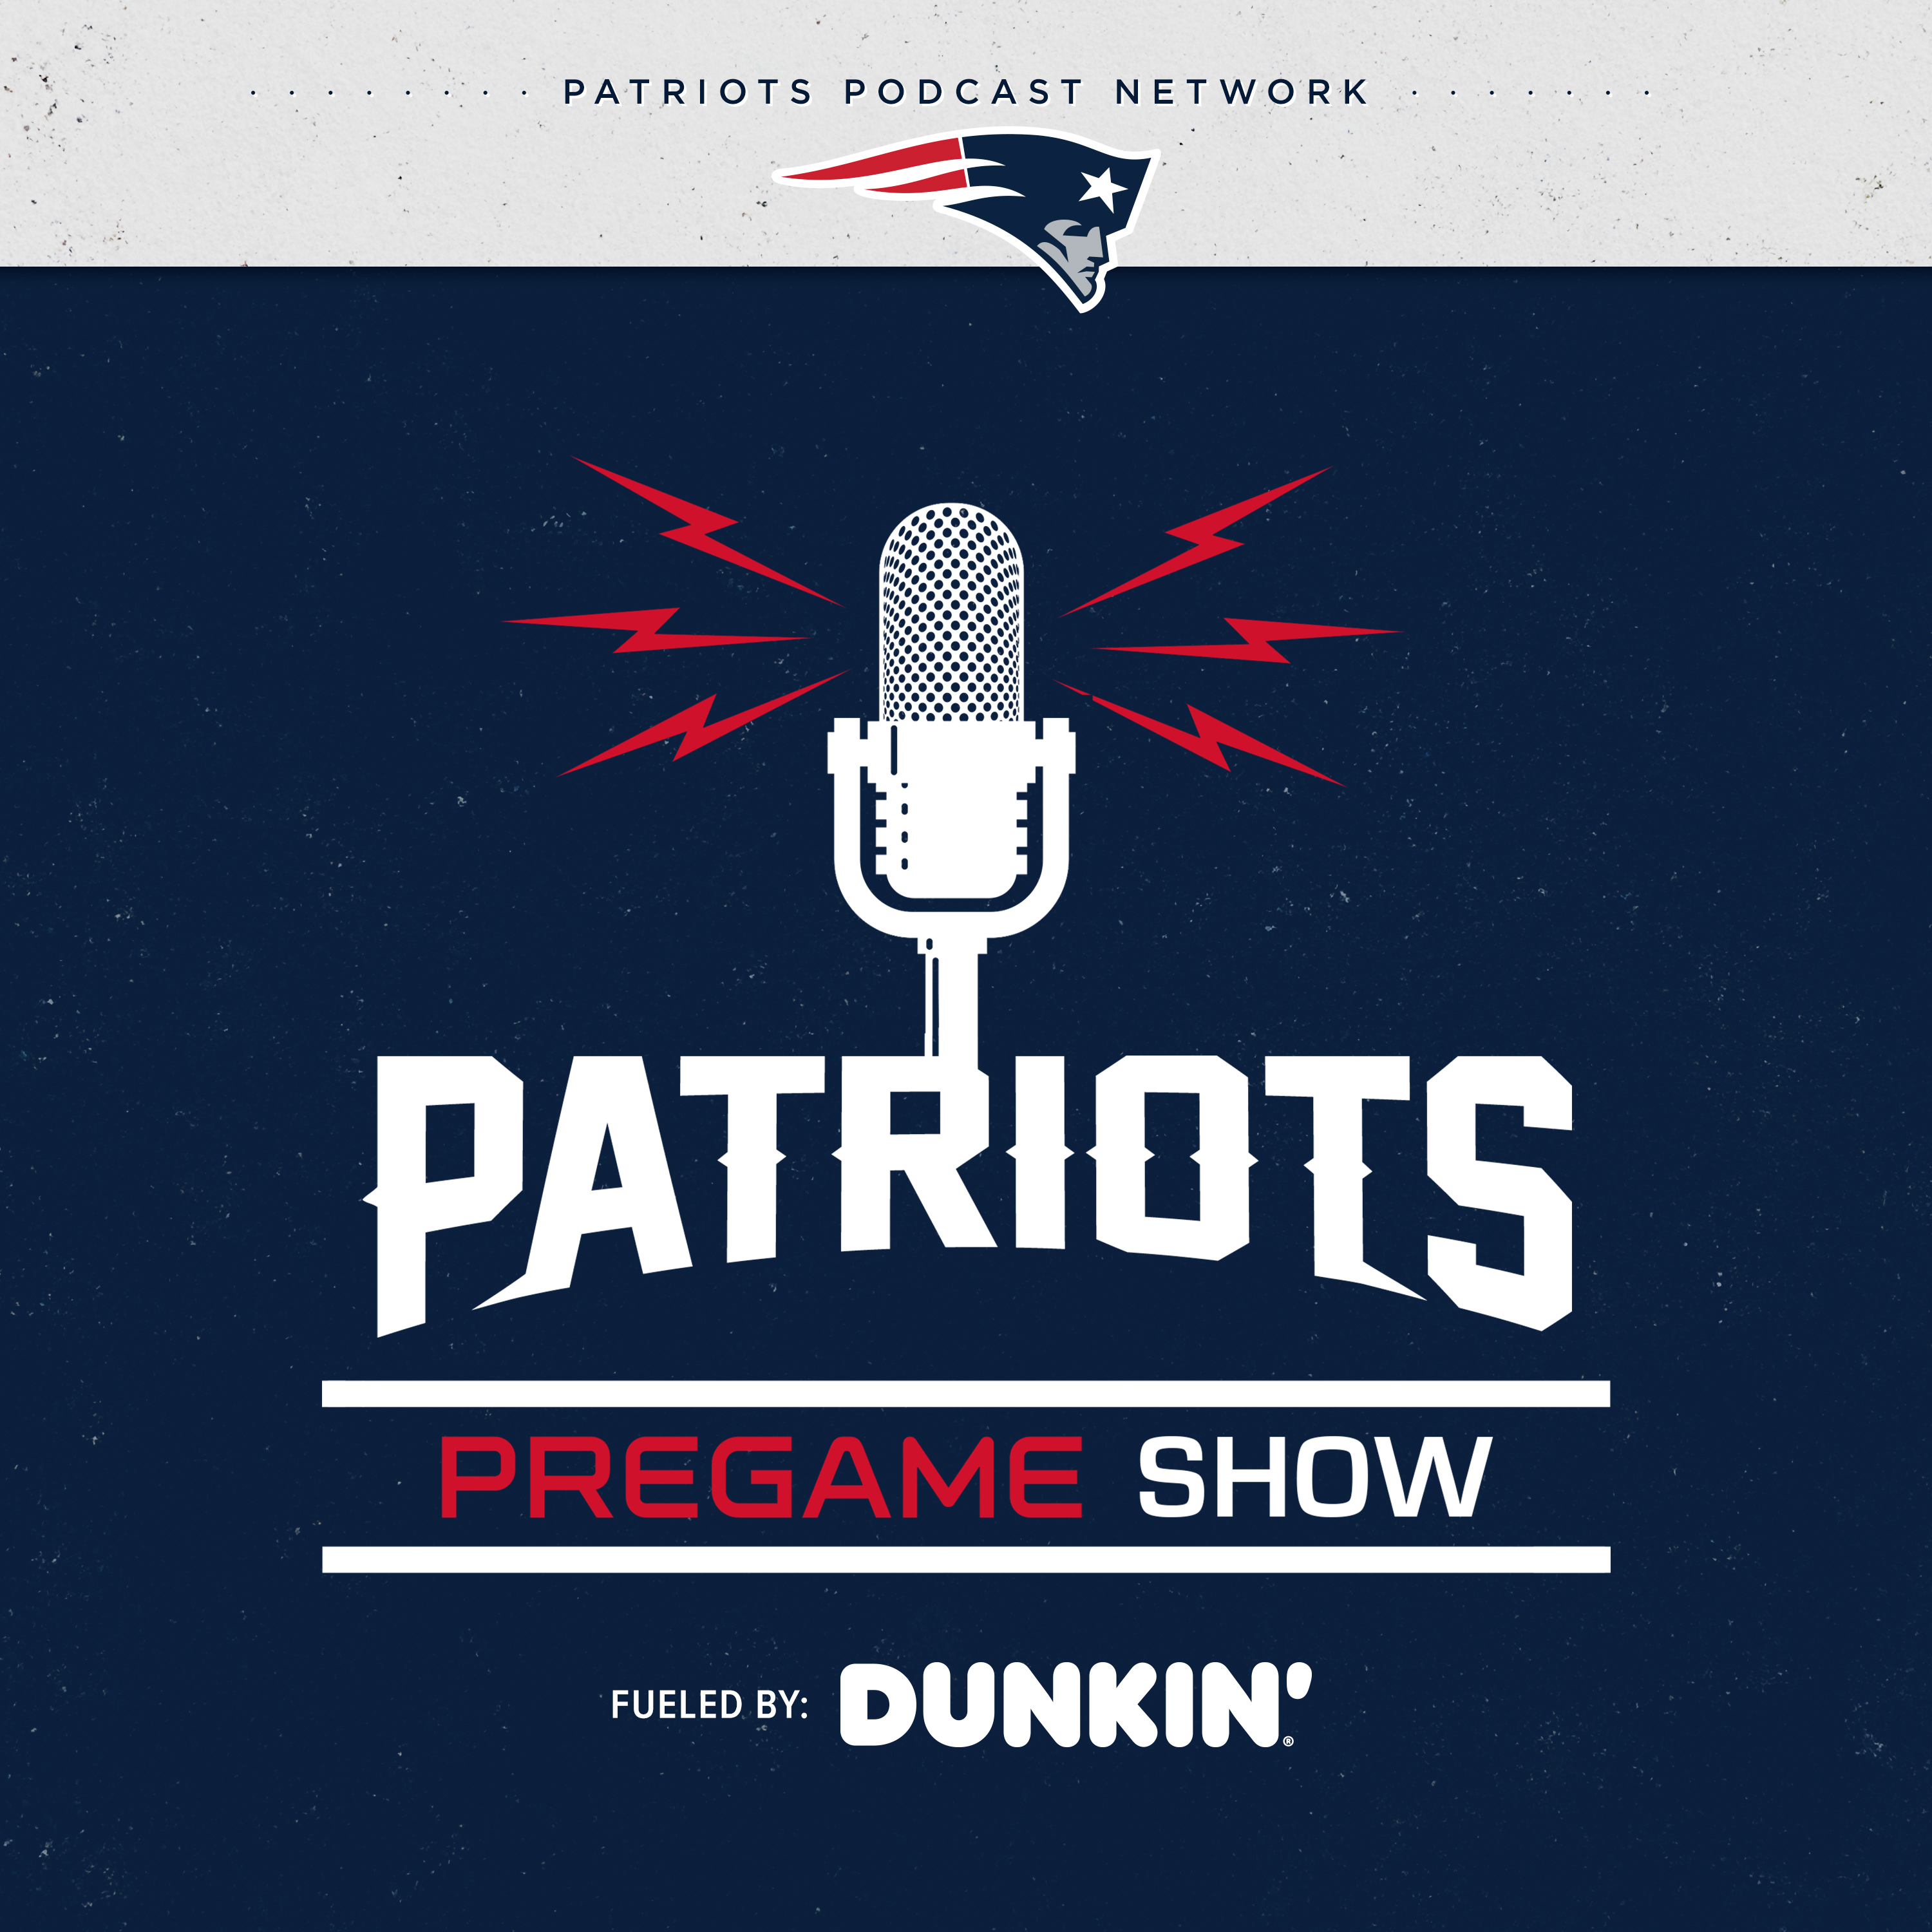 Patriots Pregame Show 11/26: Key Matchups vs. Giants, Inactives Analysis, Who's the Starting QB Today?